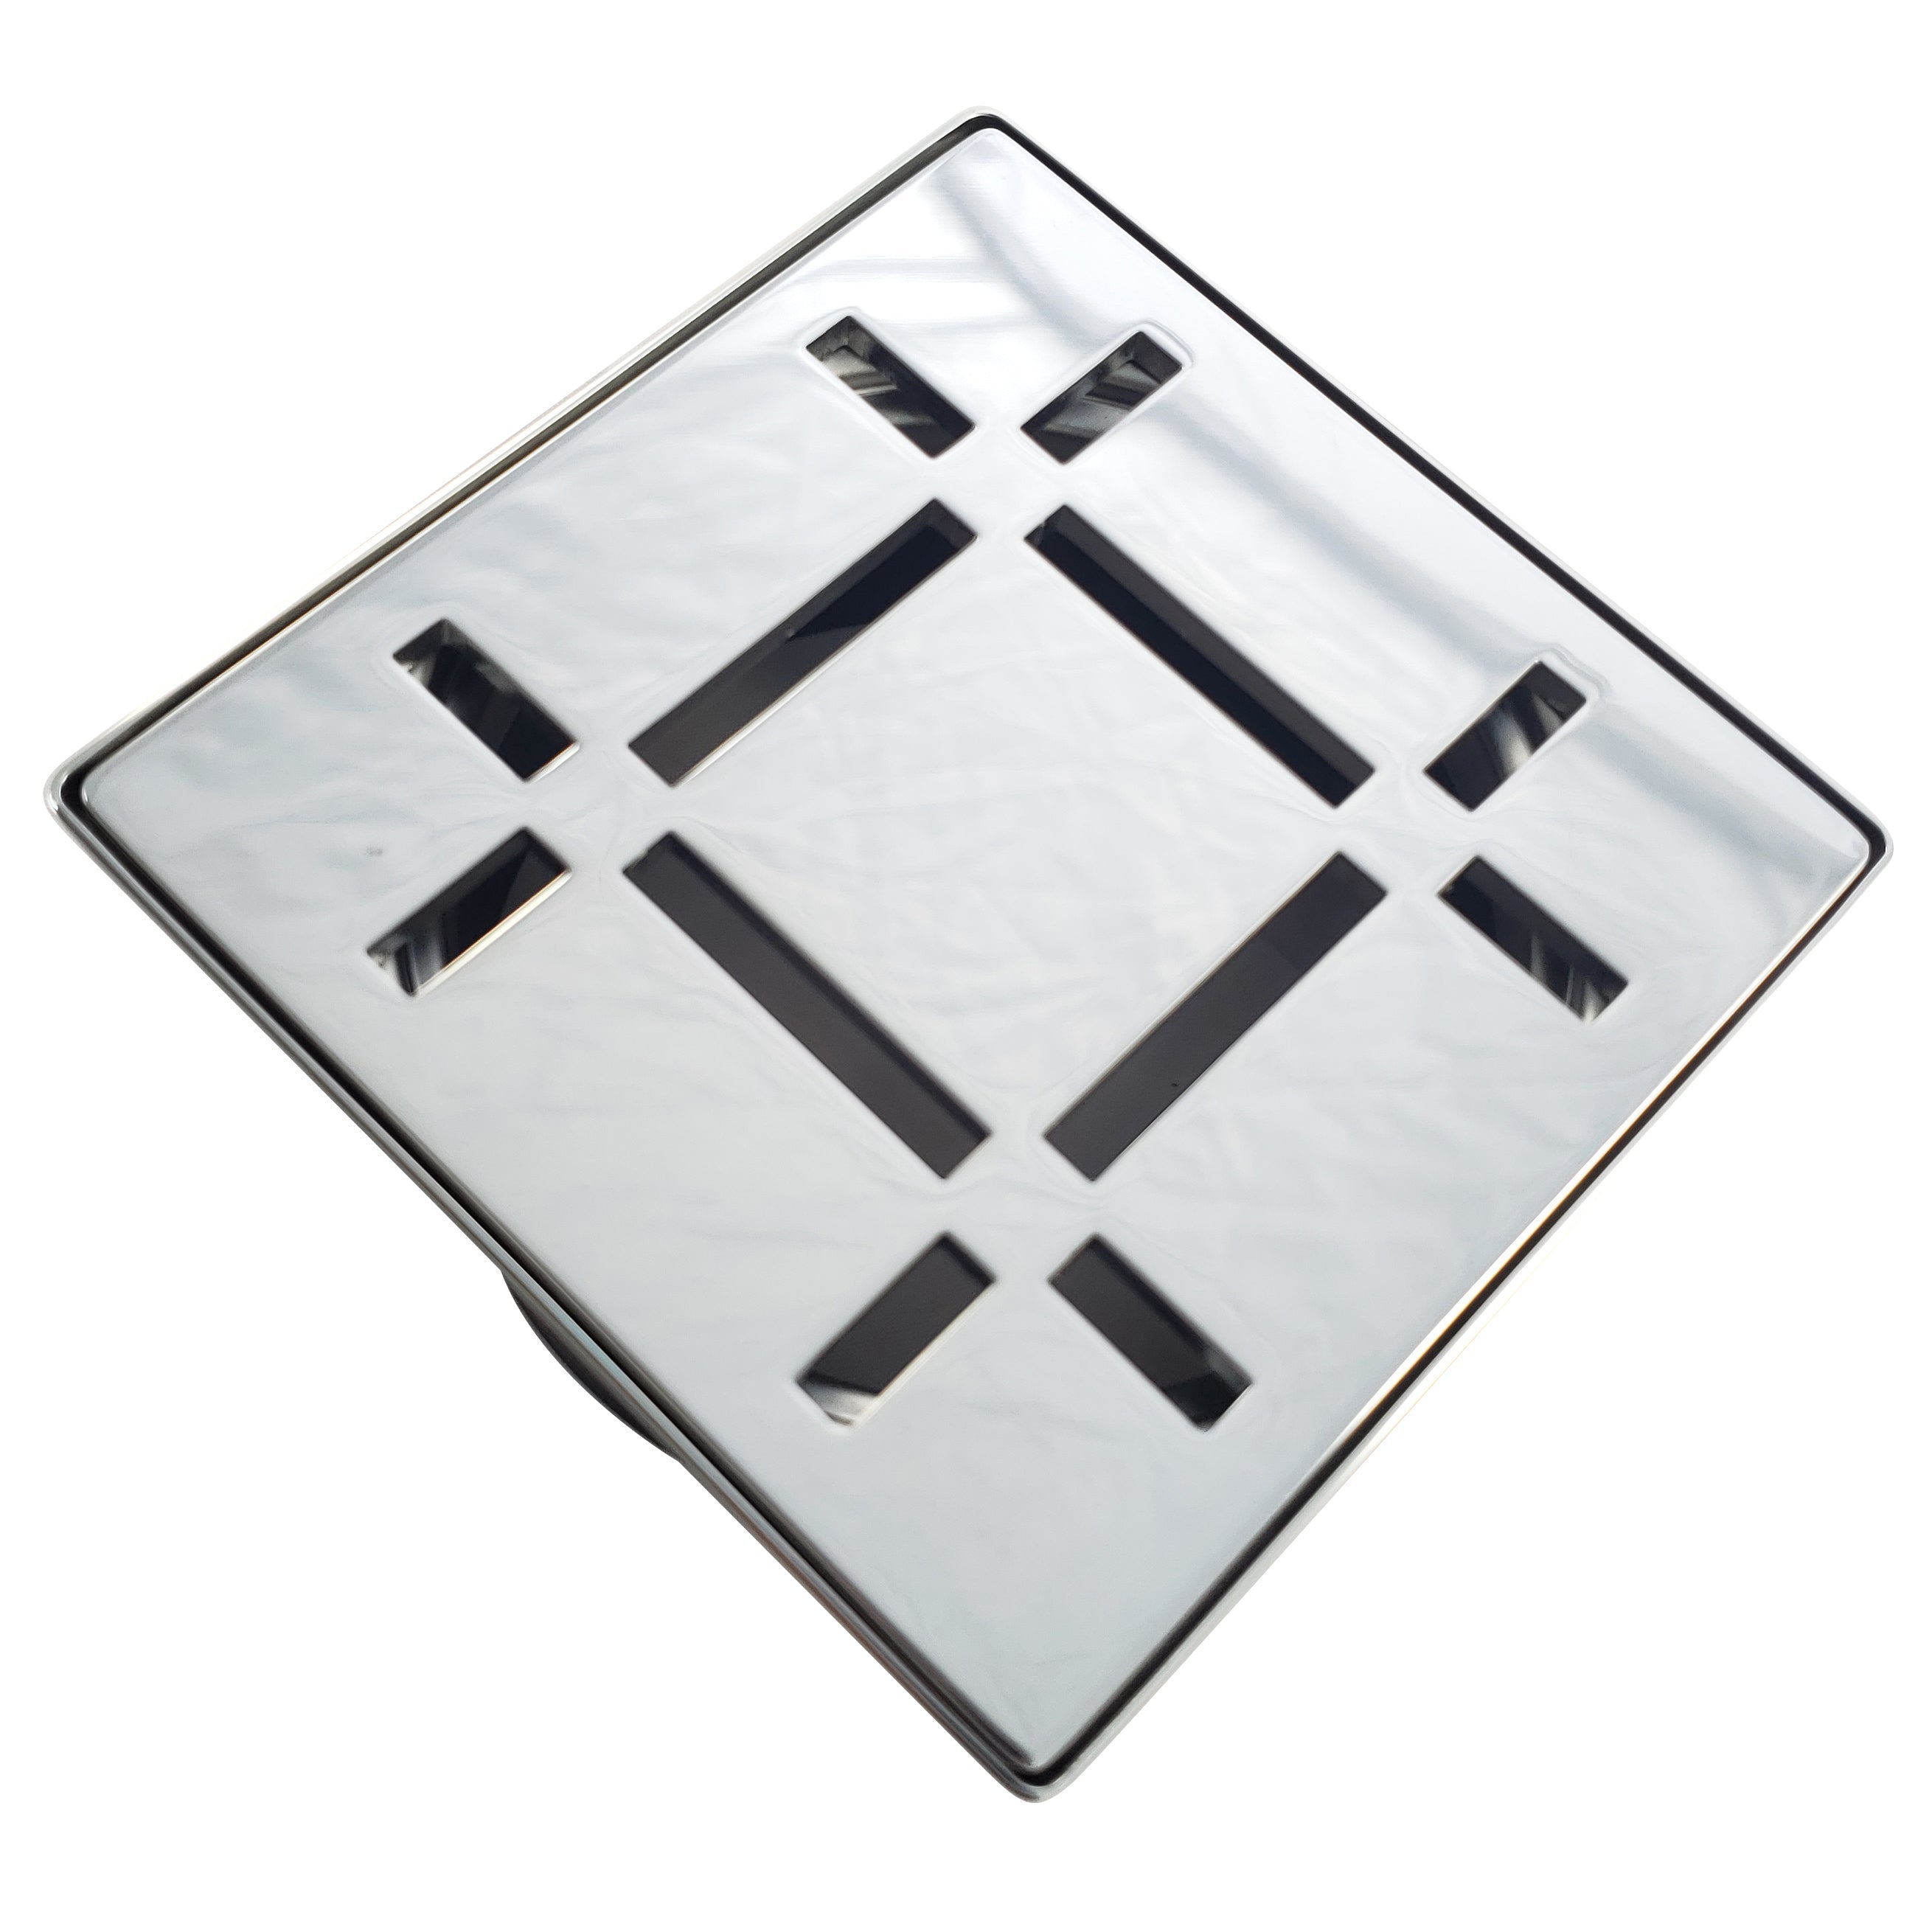 Shower Drain Grate Kit 4" Stainless Steel (Polished) - Dash Design